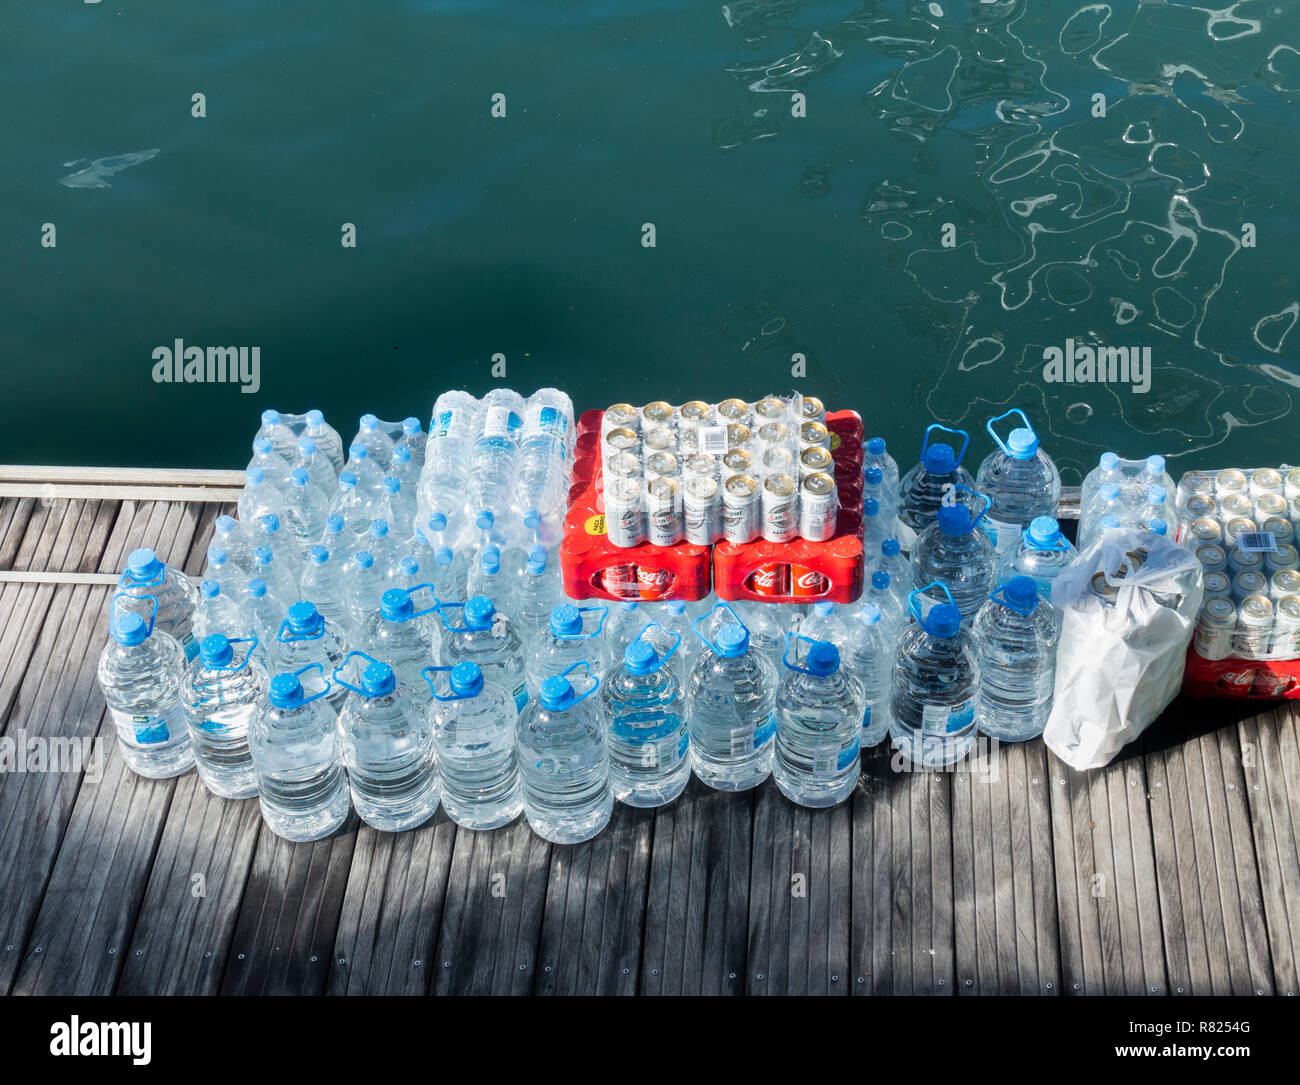 https://c8.alamy.com/comp/R8254G/plastic-bottles-of-water-waiting-to-be-loaded-on-to-yacht-in-marina-R8254G.jpg